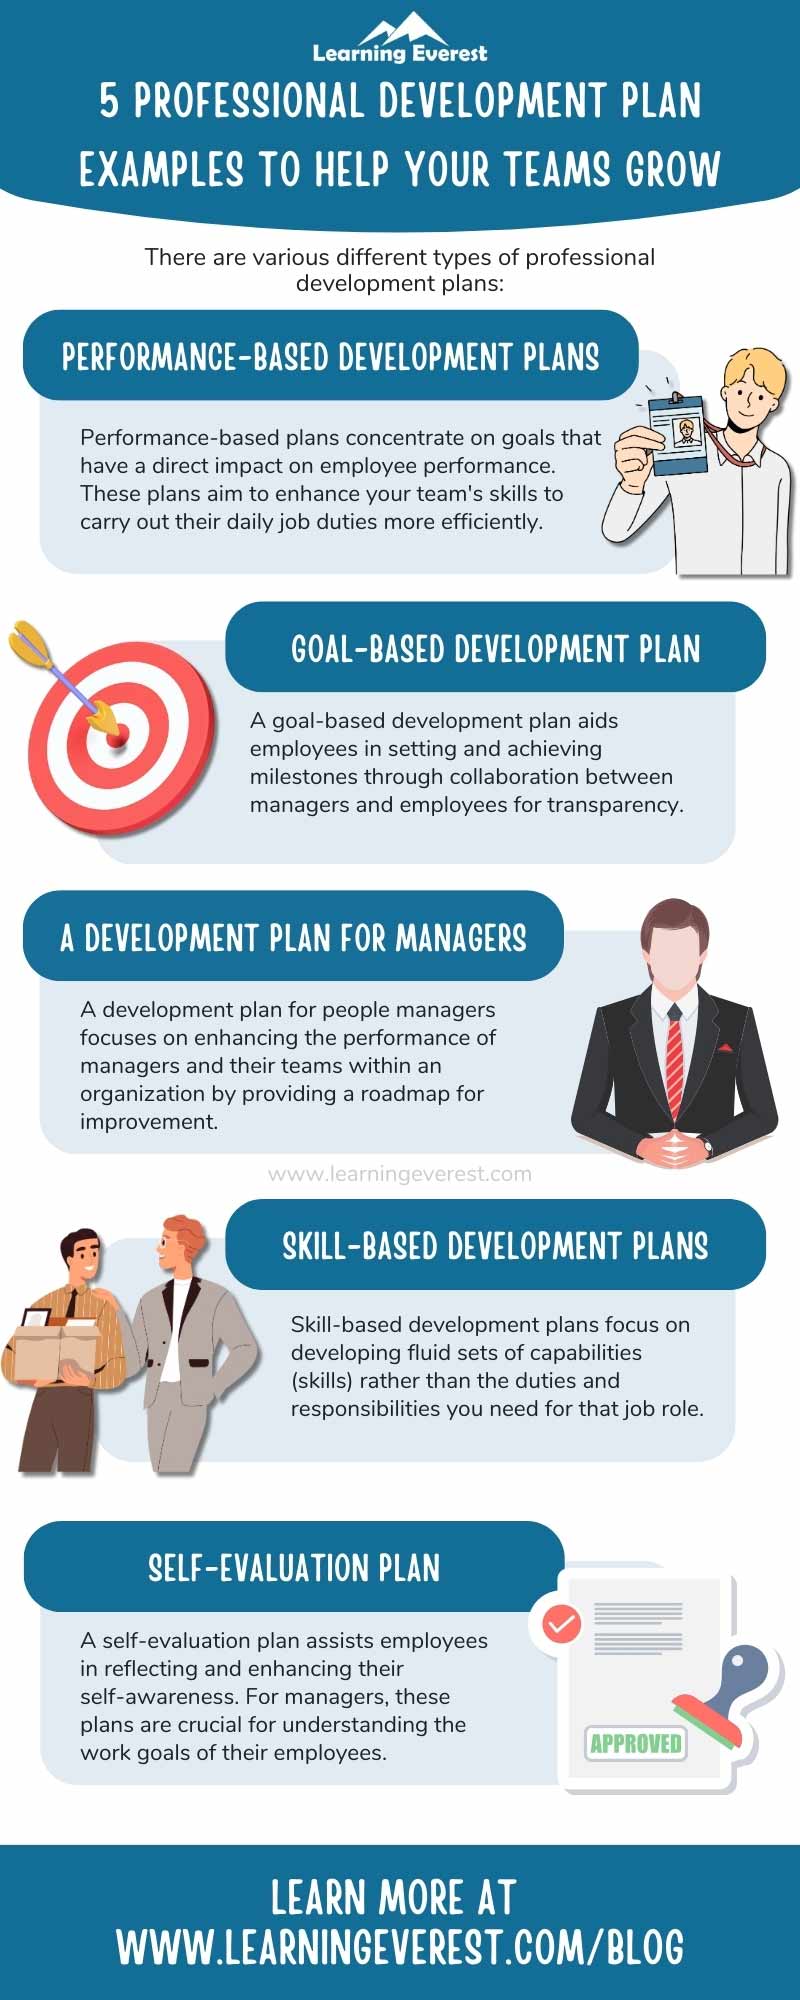 5 Professional Development Plan Examples to Help Your Teams Grow